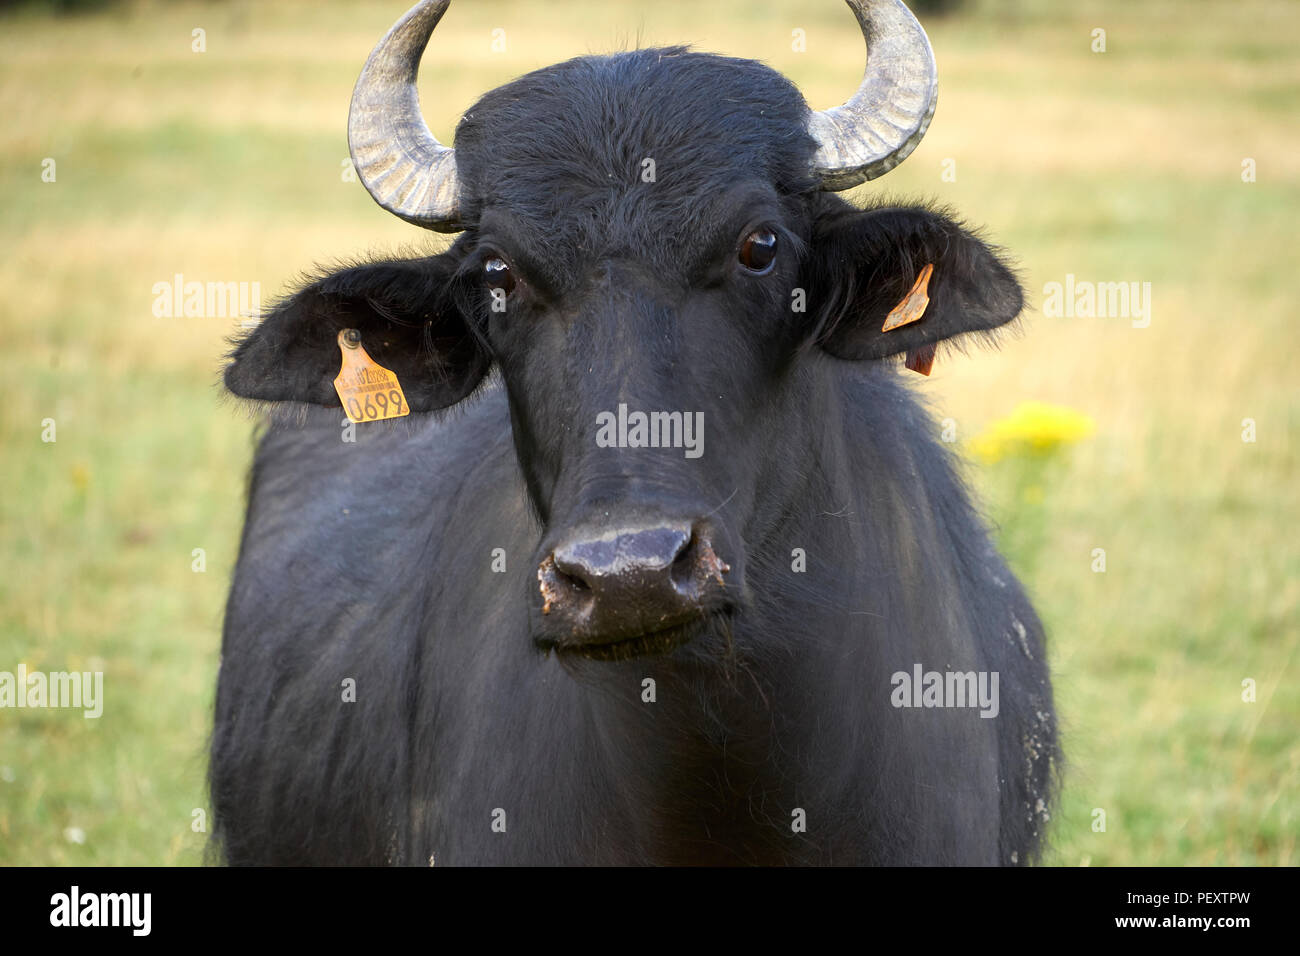 European water buffalo reintroduction for ecological restoration and rewilding, conservation, wildlife management, ranger Stock Photo